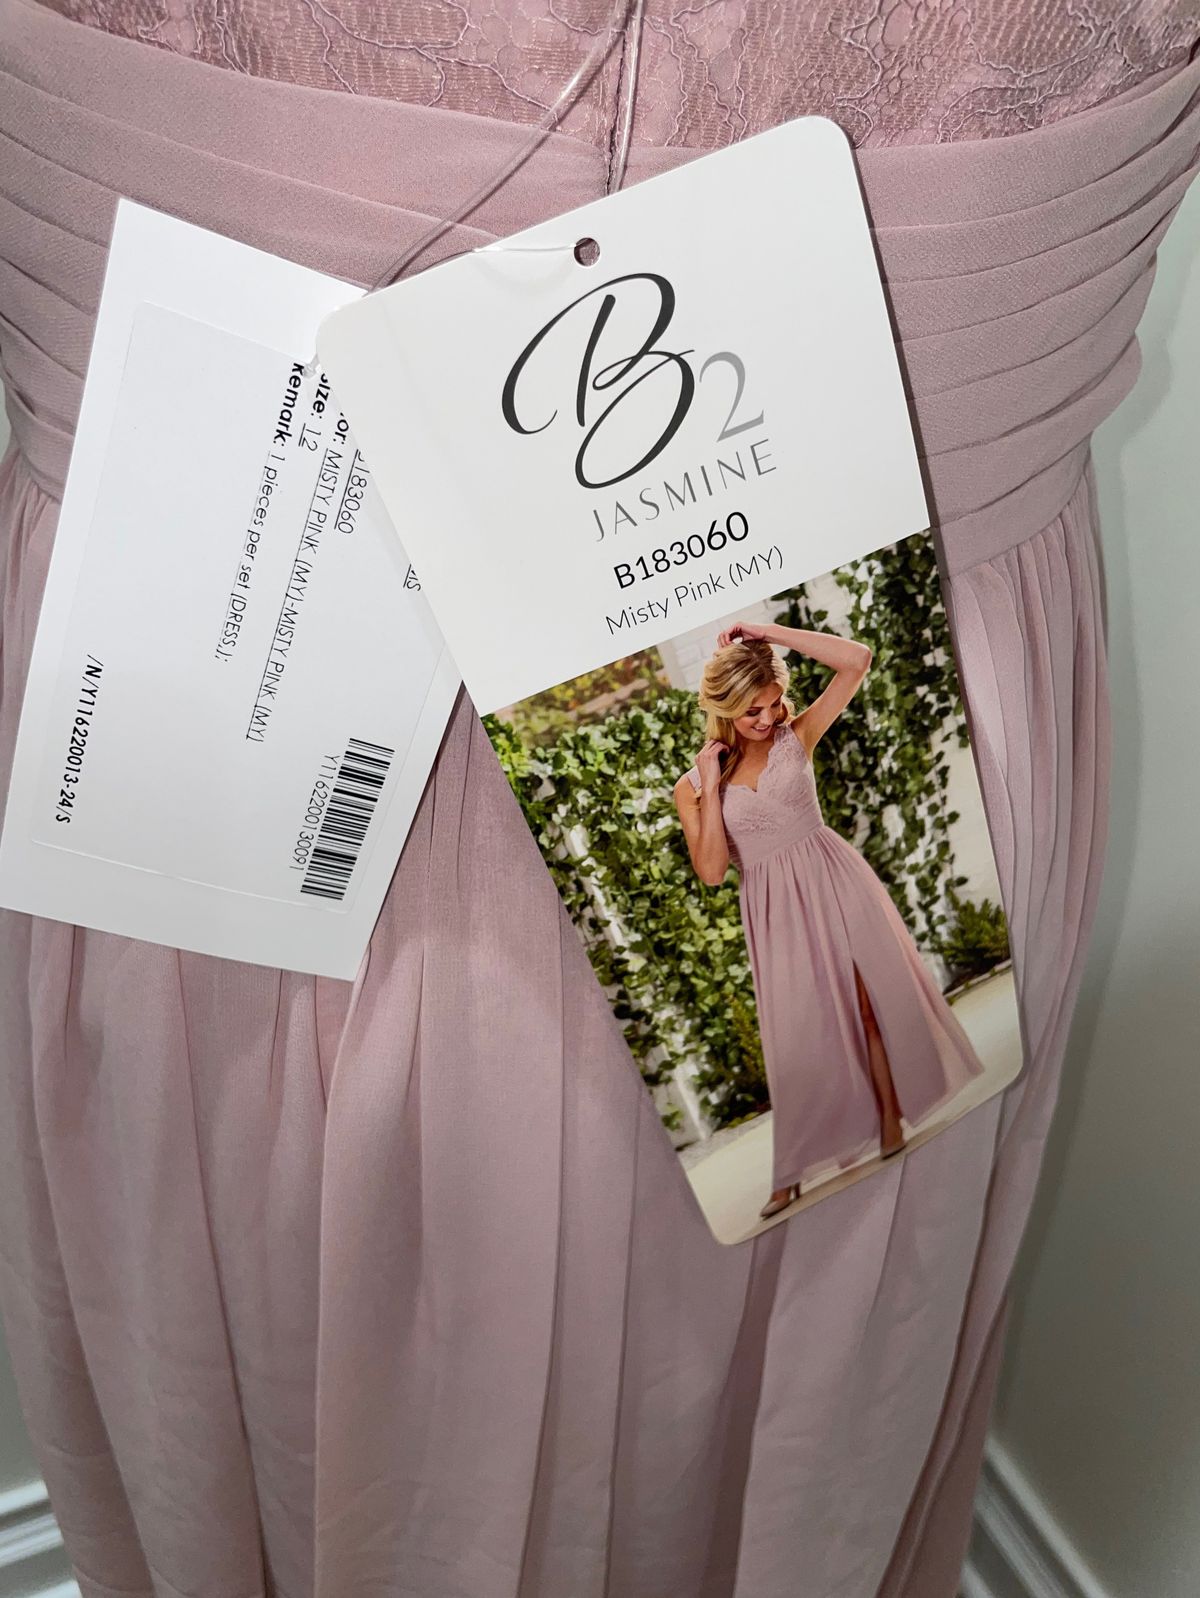 Style B183060 Jasmine Size 12 Bridesmaid Cap Sleeve Lace Light Pink A-line Dress on Queenly